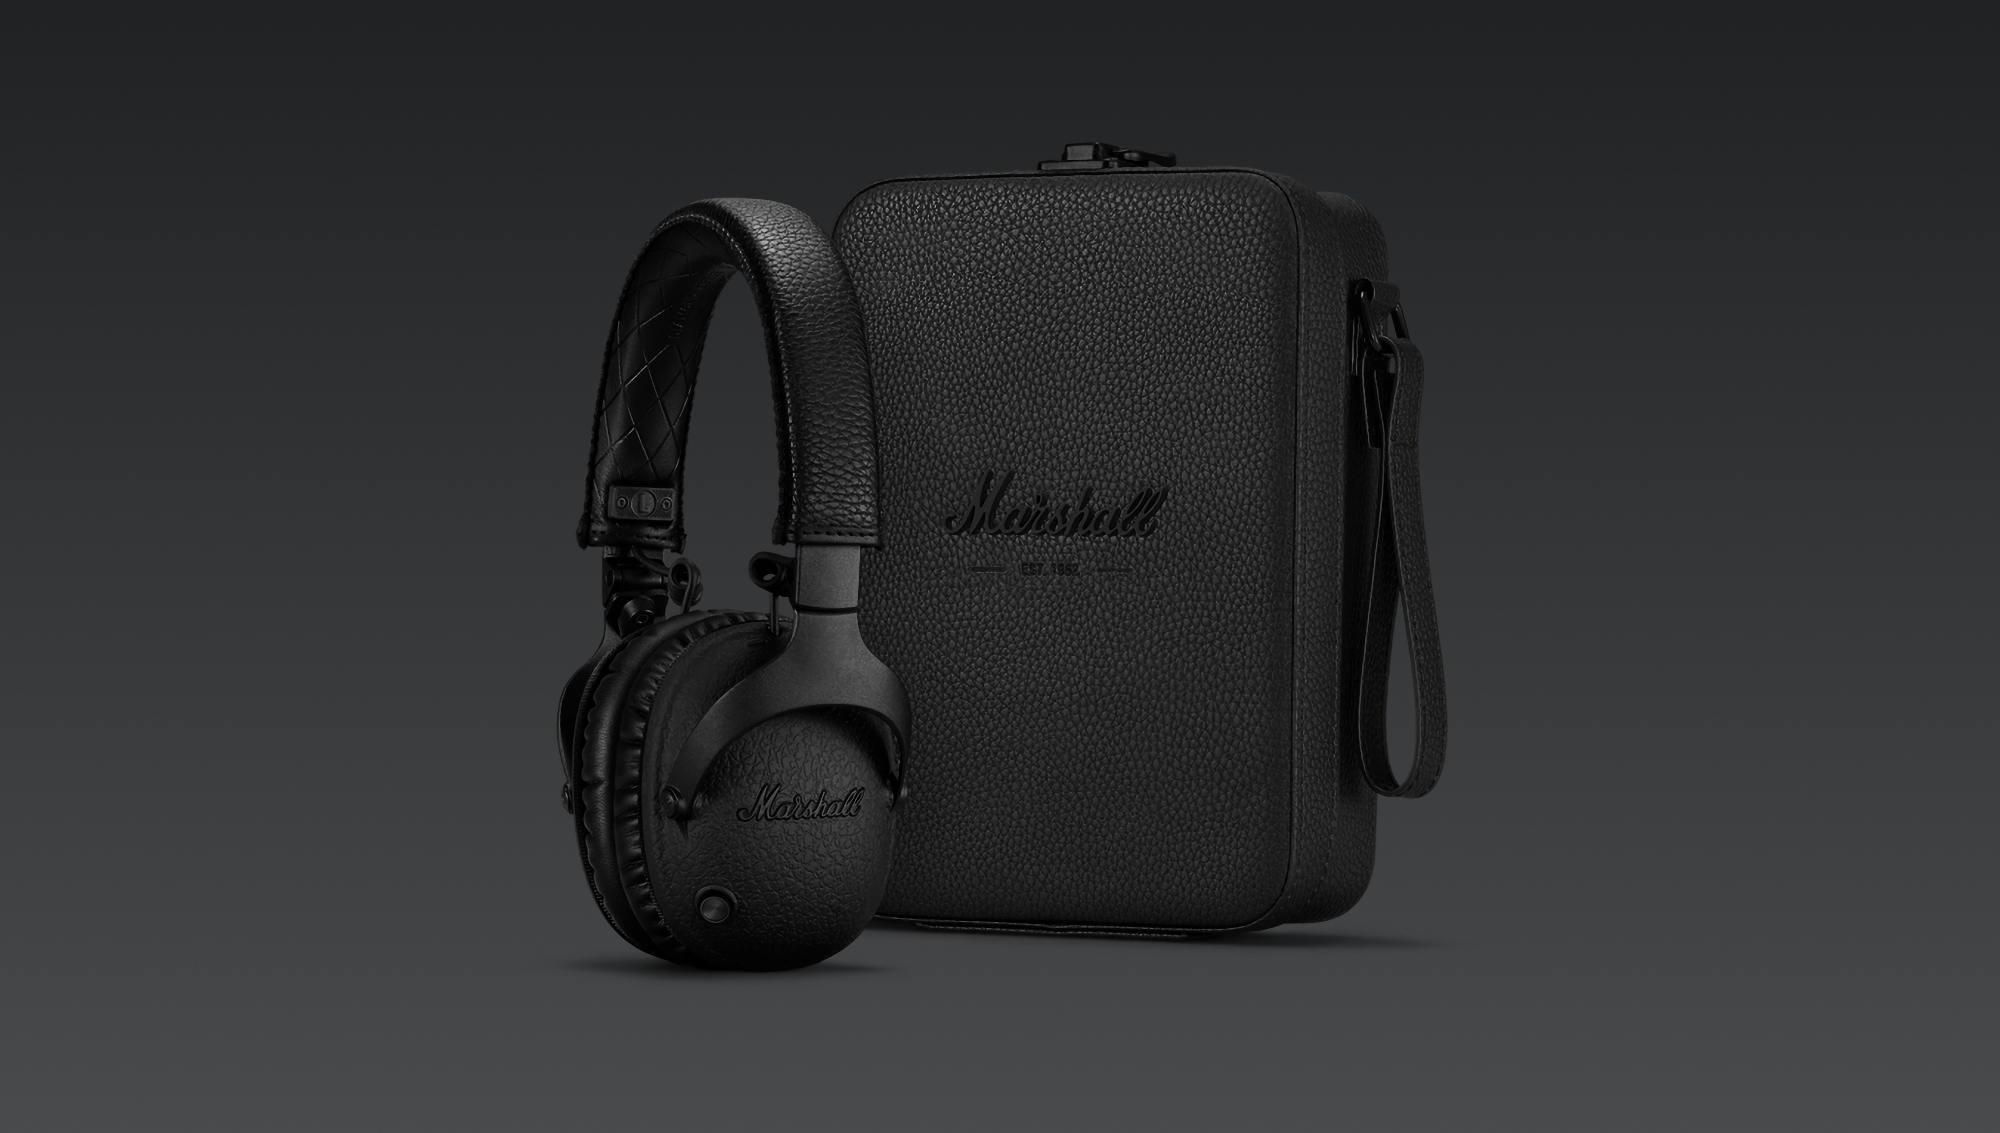 Marshall introduced the anniversary version of the Monitor II ANC headphones with a battery life of up to 45 hours and $360 price